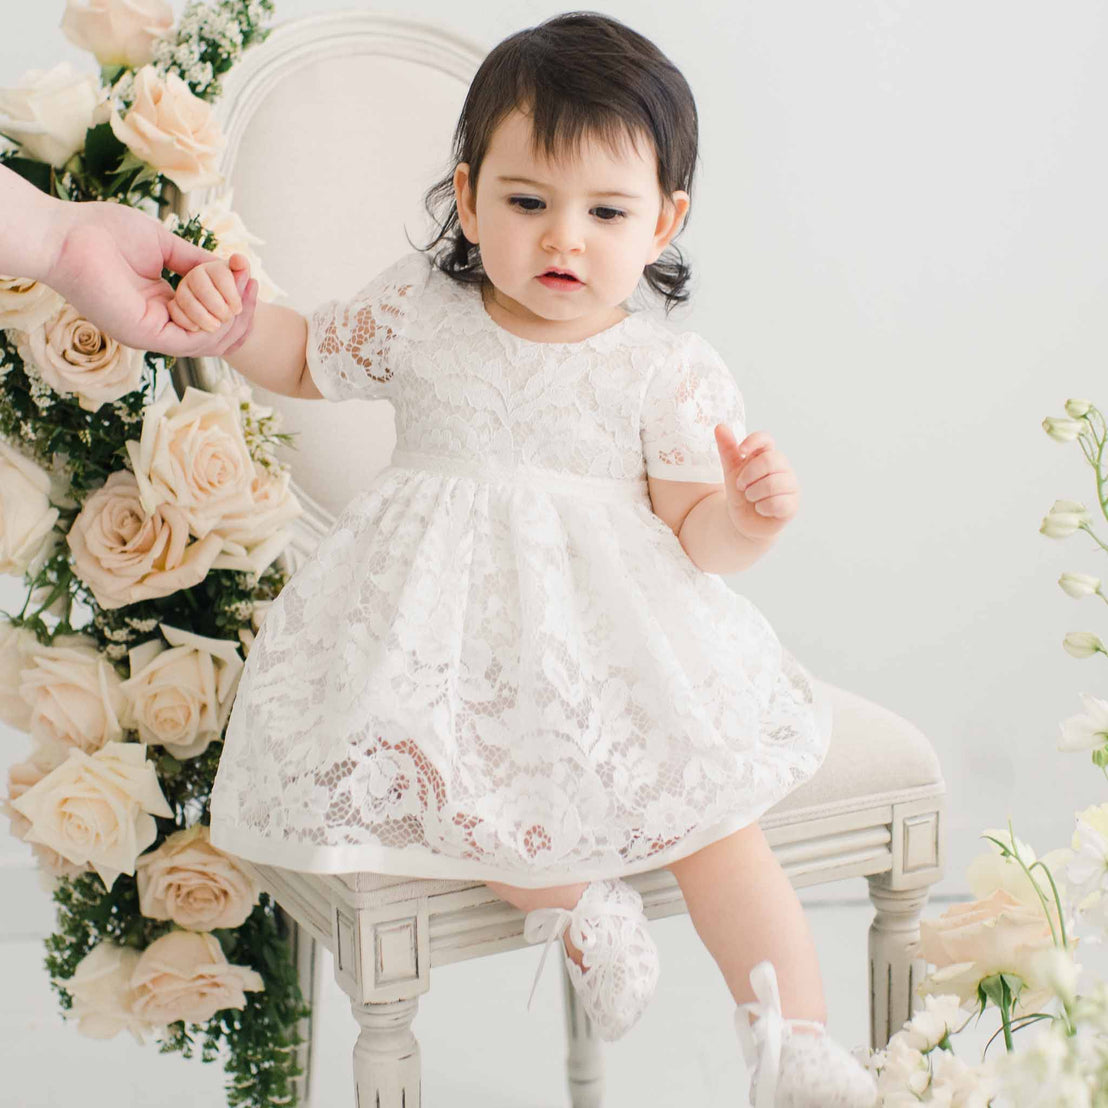 A toddler with dark hair in a white Rose Romper Dress sits on a cushioned stool, holding an adult's hand, surrounded by cream roses on a white background.